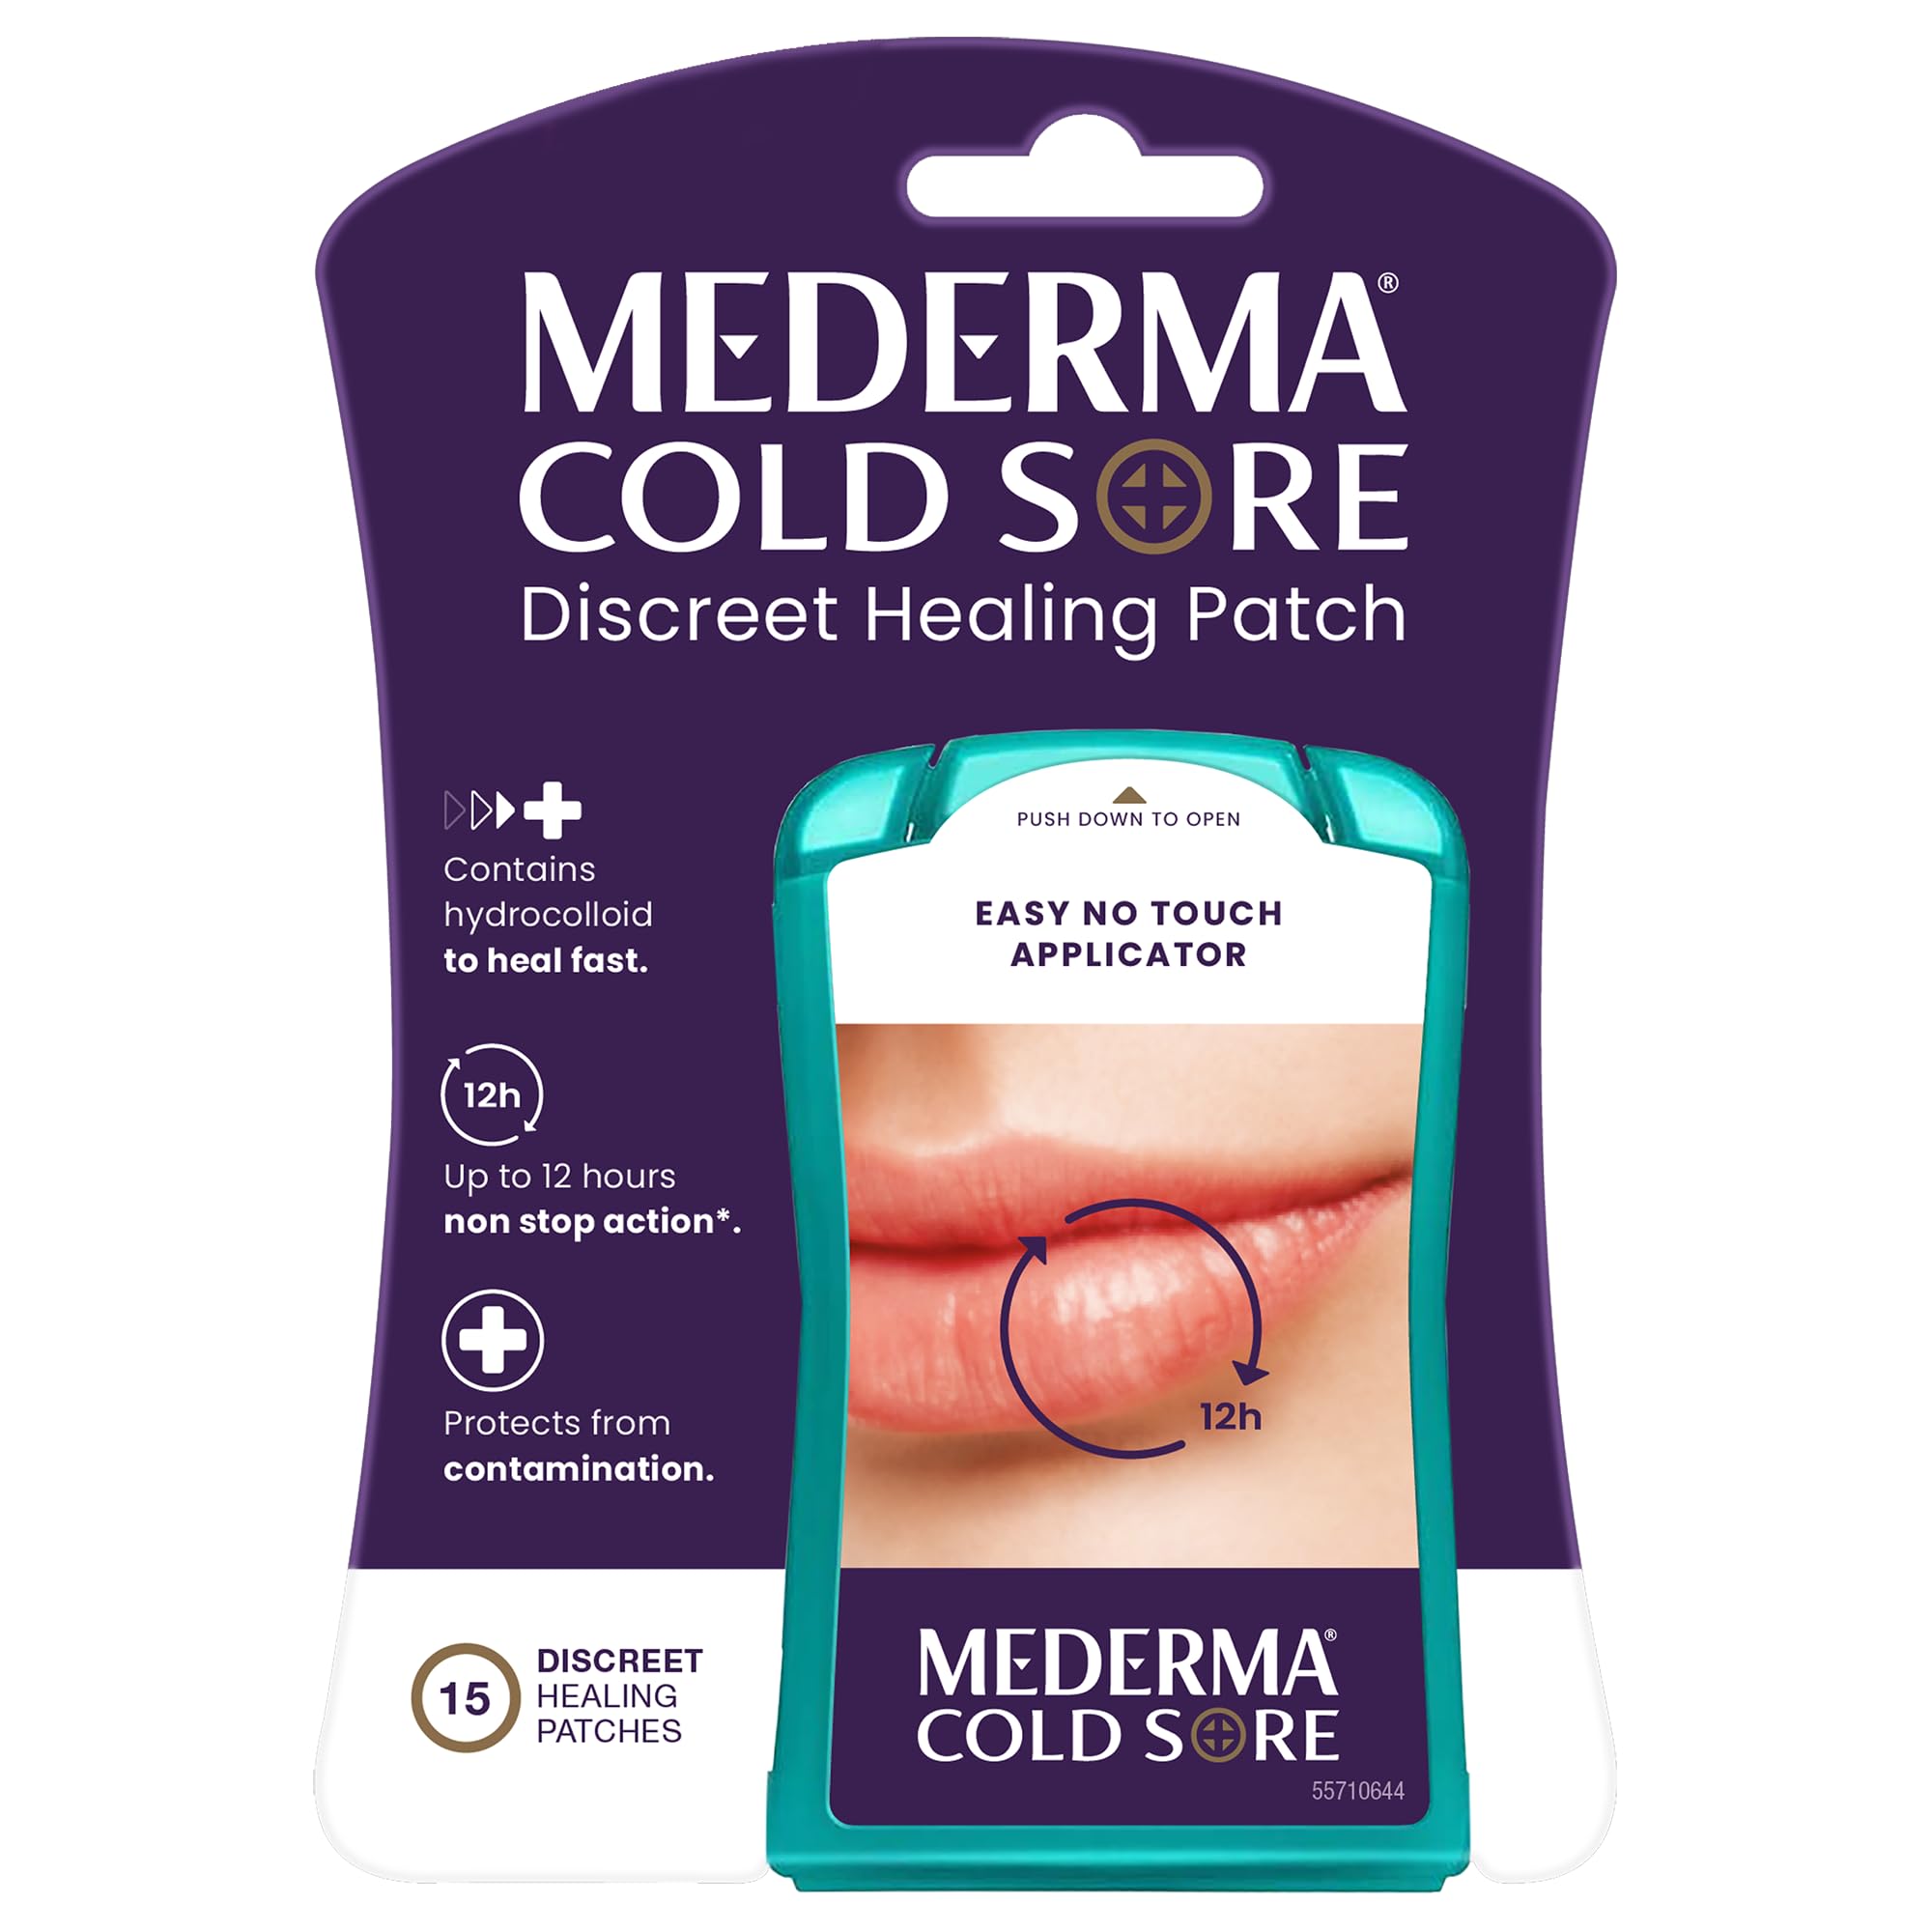 Abreva 10 Percent Docosanol Cold Sore Treatment, Treats Your Fever Blister in 2.5 Days - 0.07 oz Pump & Mederma Fever Blister Discreet Healing Patch - A Patch That Protects and Conceals Cold Sores